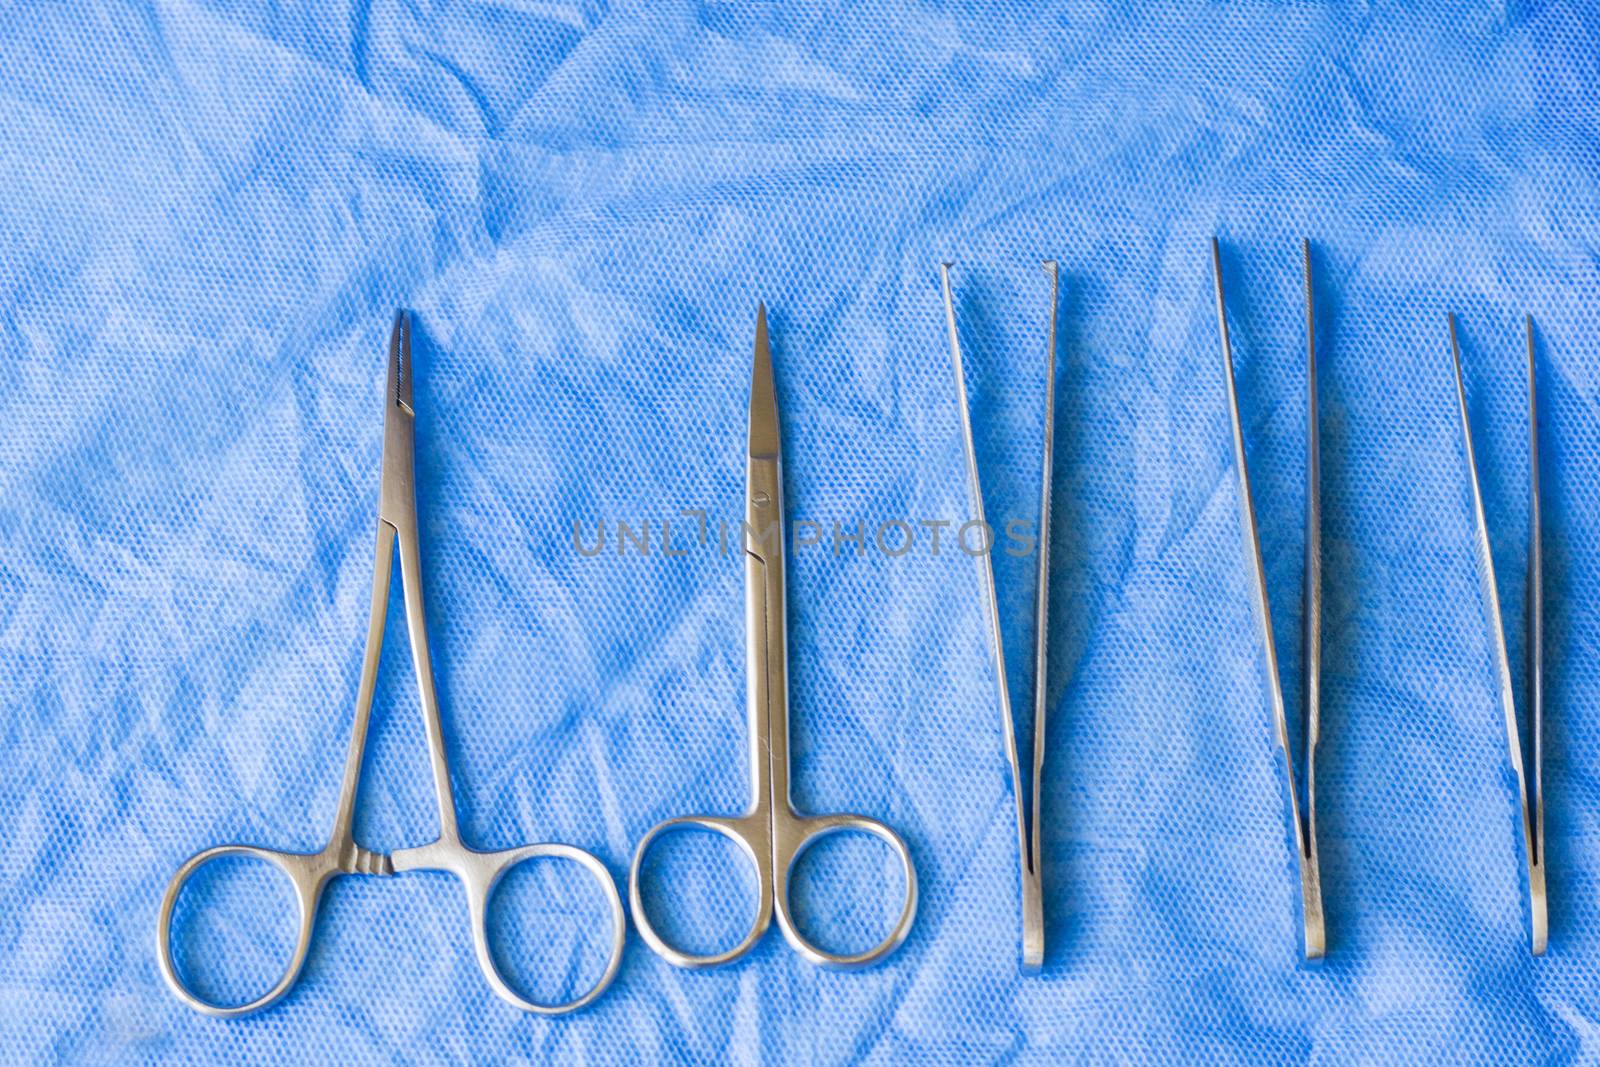 Dissection Kit - Stainless Steel Tools for Medical Students of Anatomy, Biology, Veterinary by Taidundua